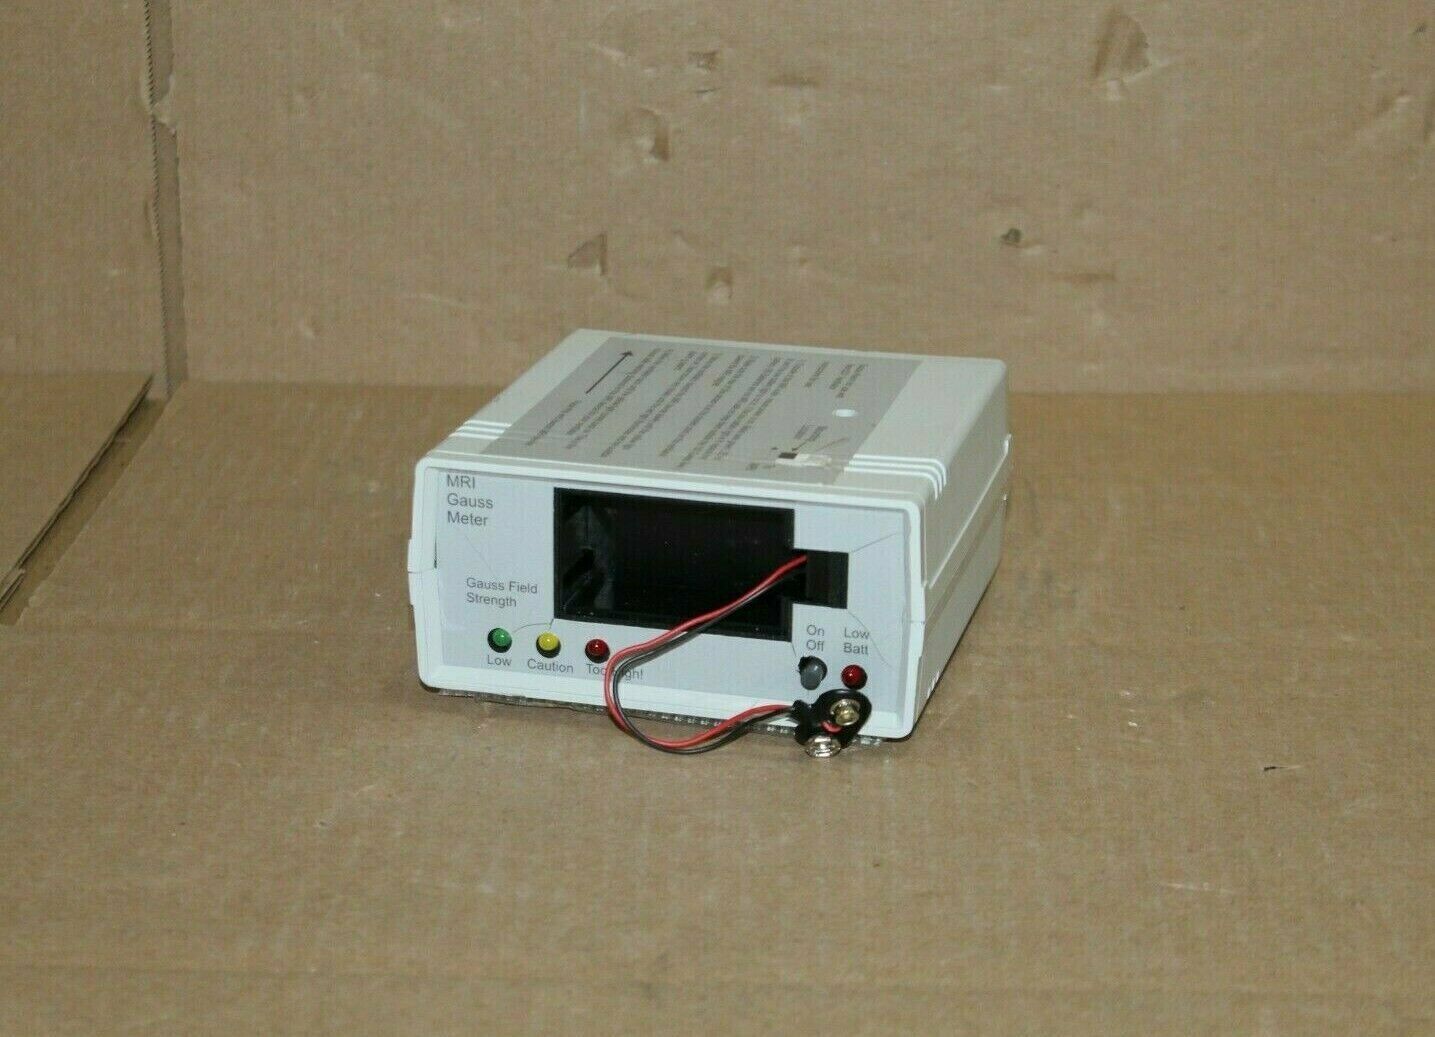 Versamed Mri Gauss Meter For Ivent201 P/n: 888a10005-a0 -missing Battery Cover